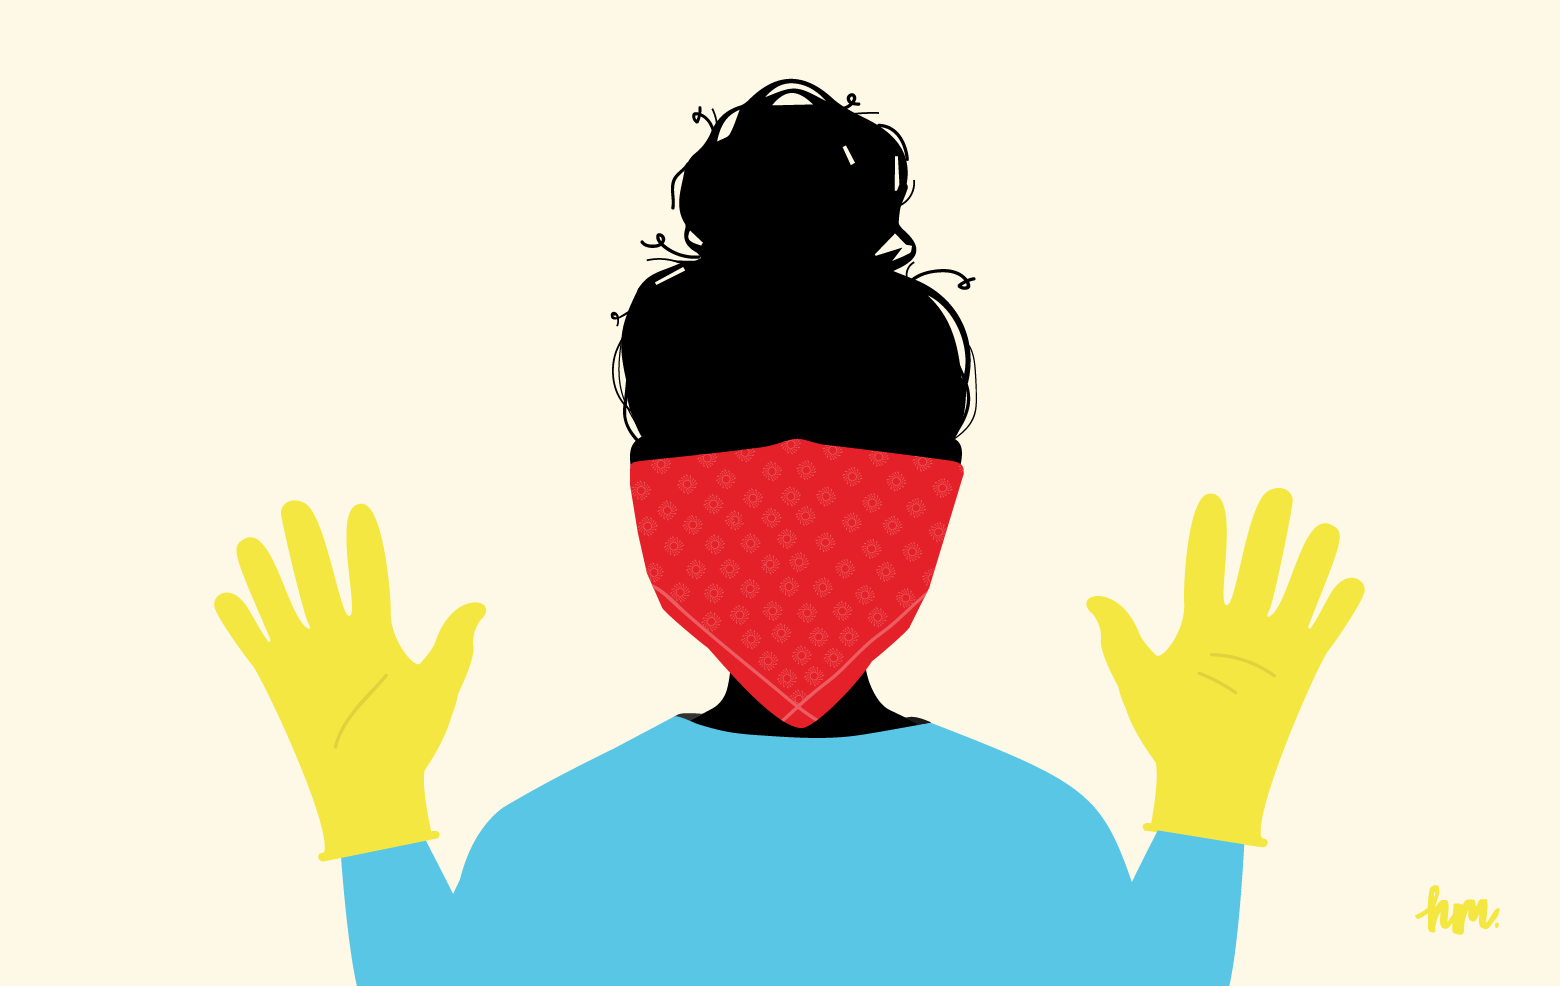 Illustration of me wearing a red handkerchief mask on my face and yellow rubber gloves on my hands.